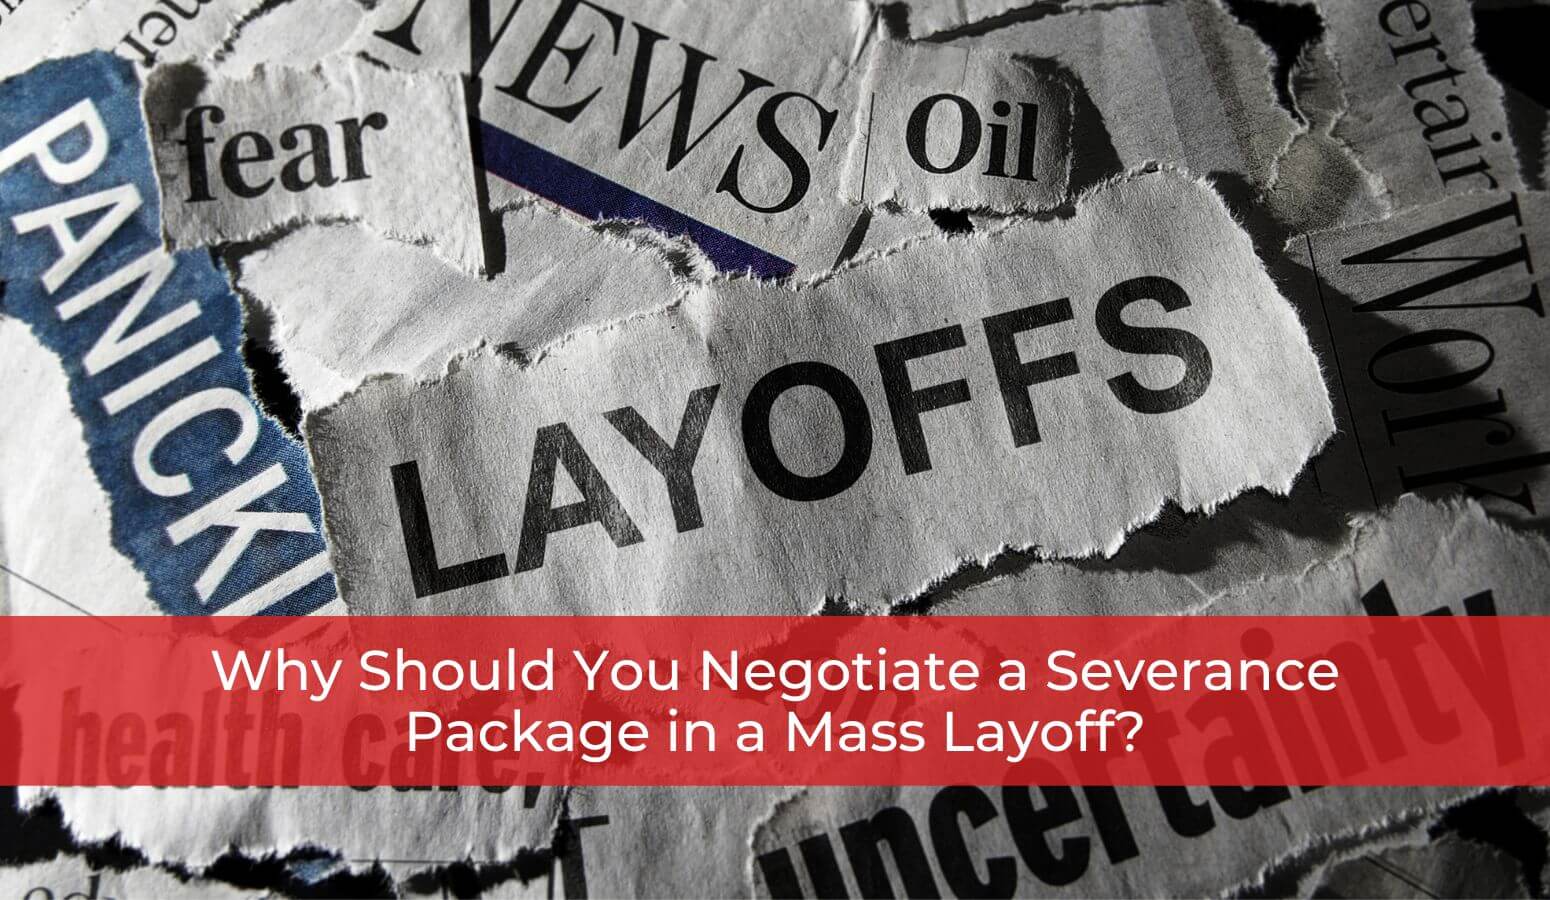 Featured image for “Why Should You Negotiate a Severance Package in a Mass Layoff?”